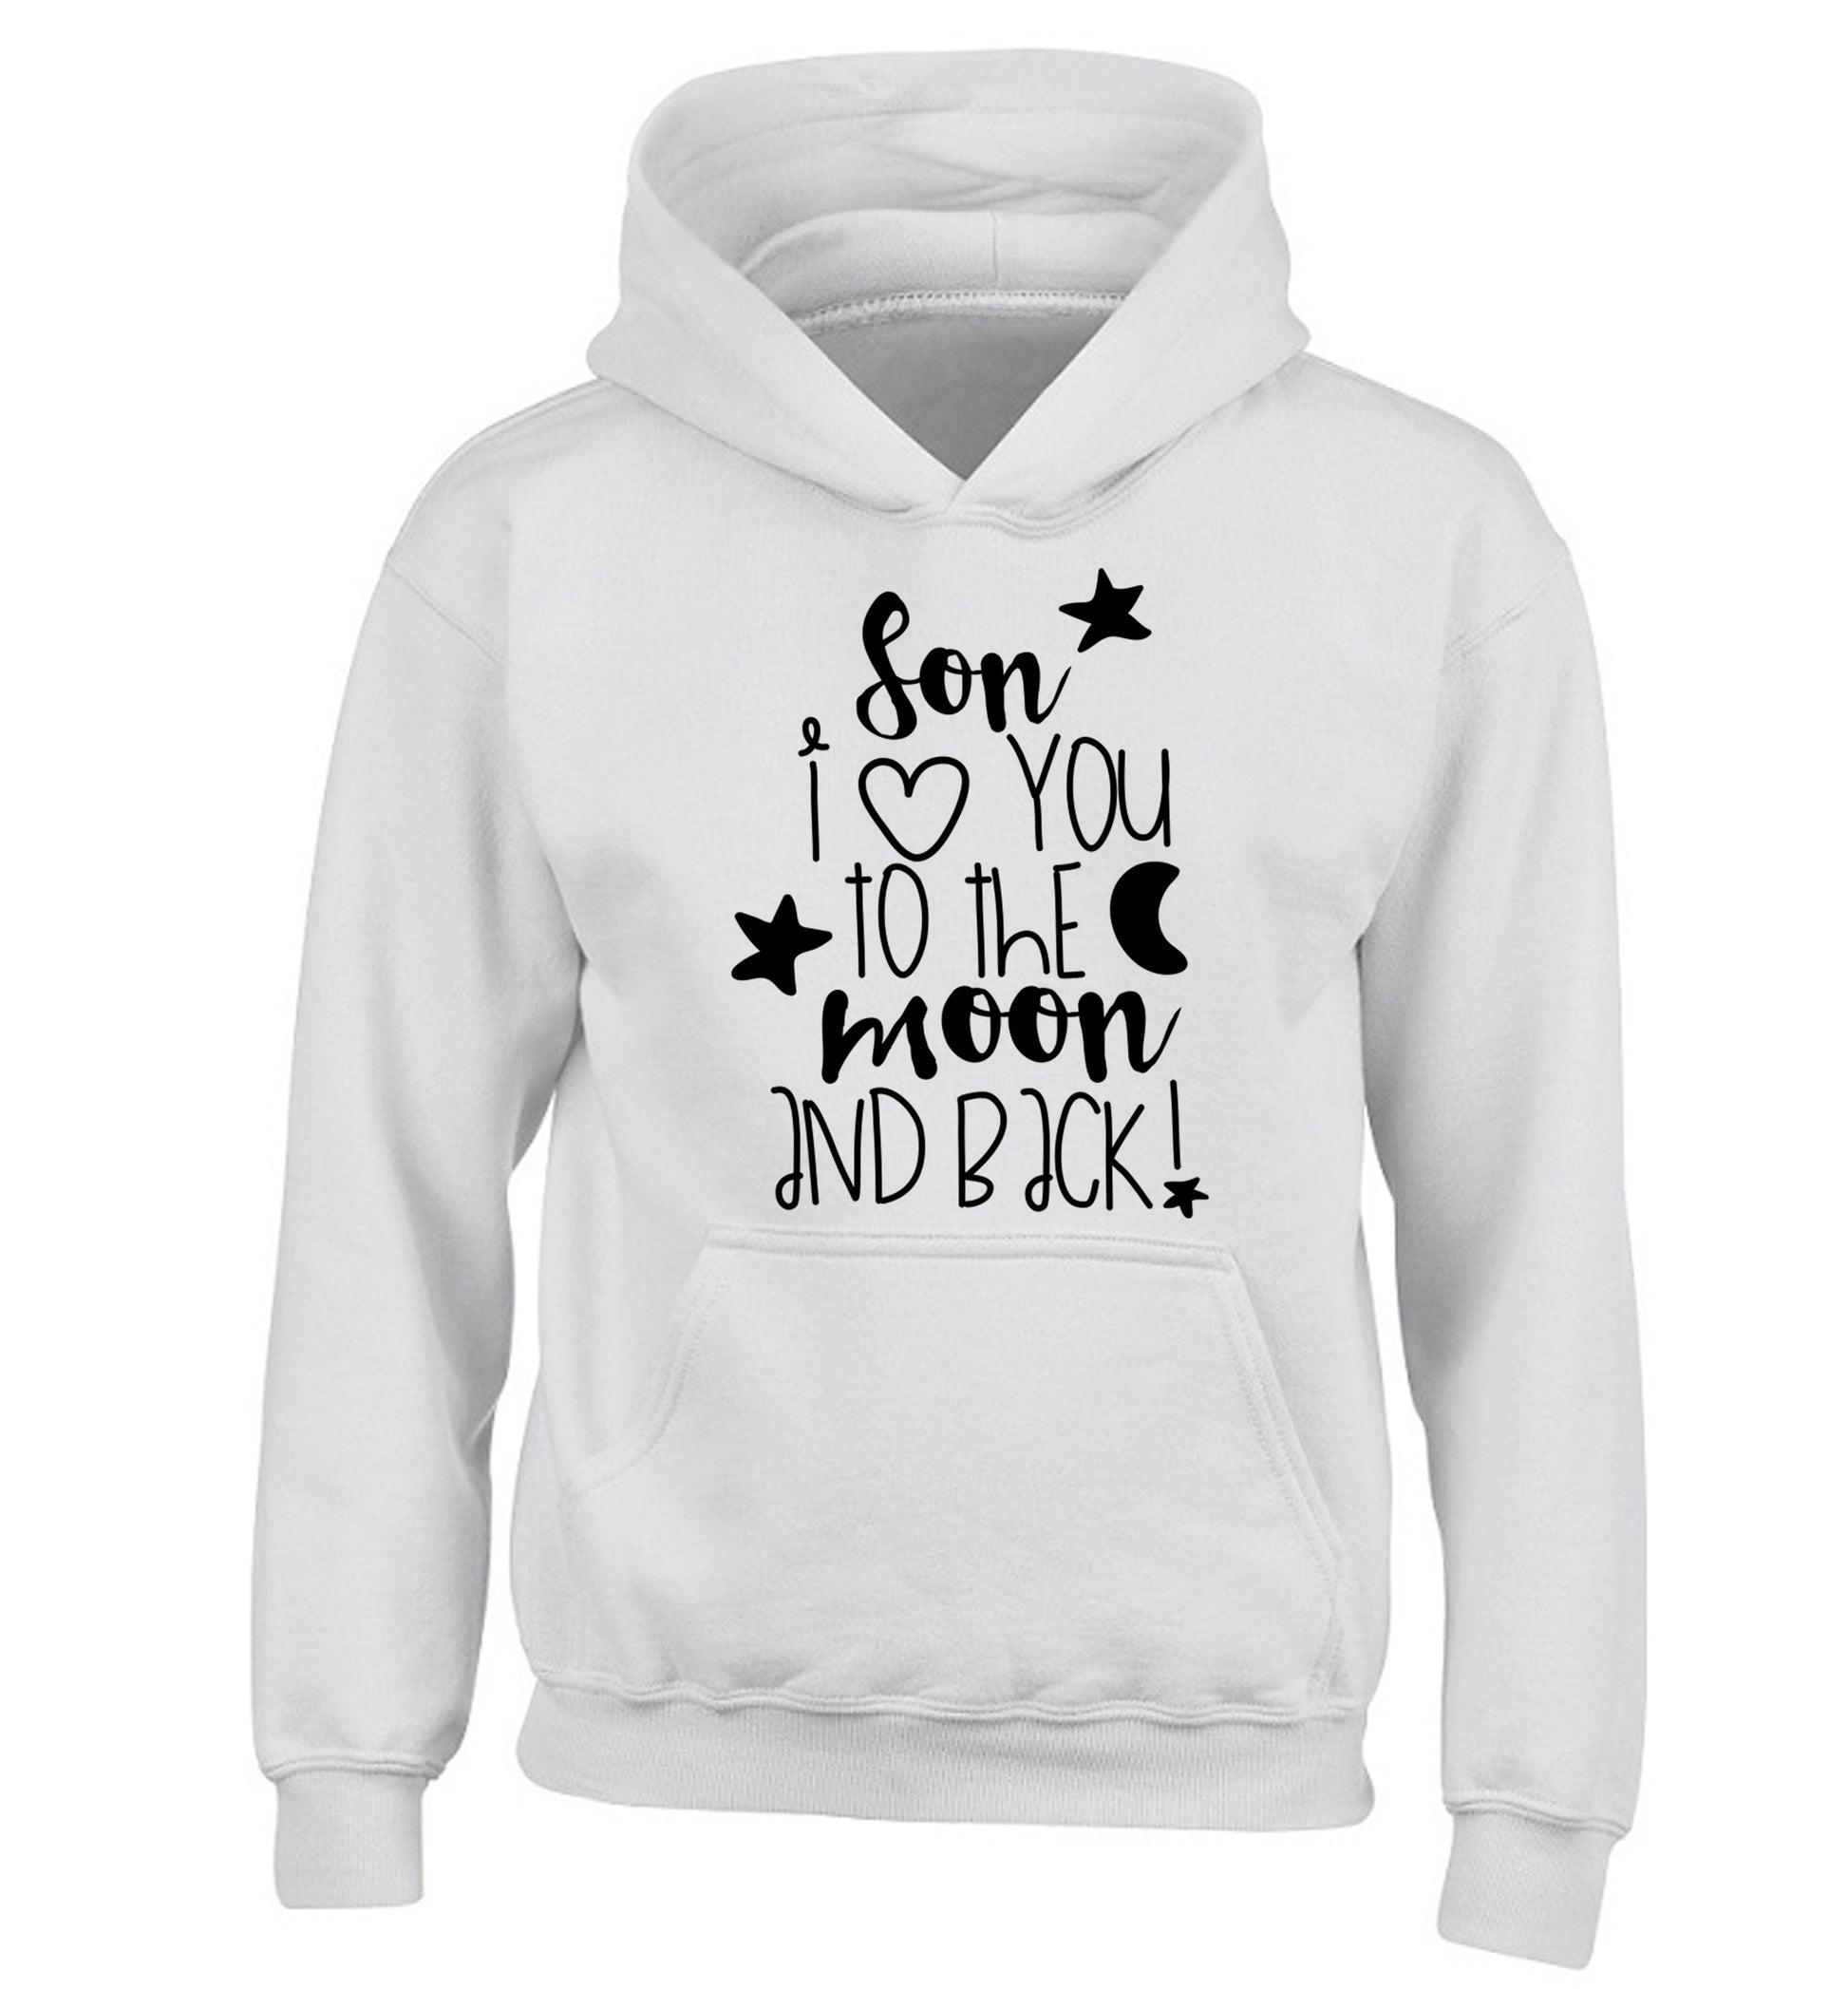 Son I love you to the moon and back children's white hoodie 12-14 Years